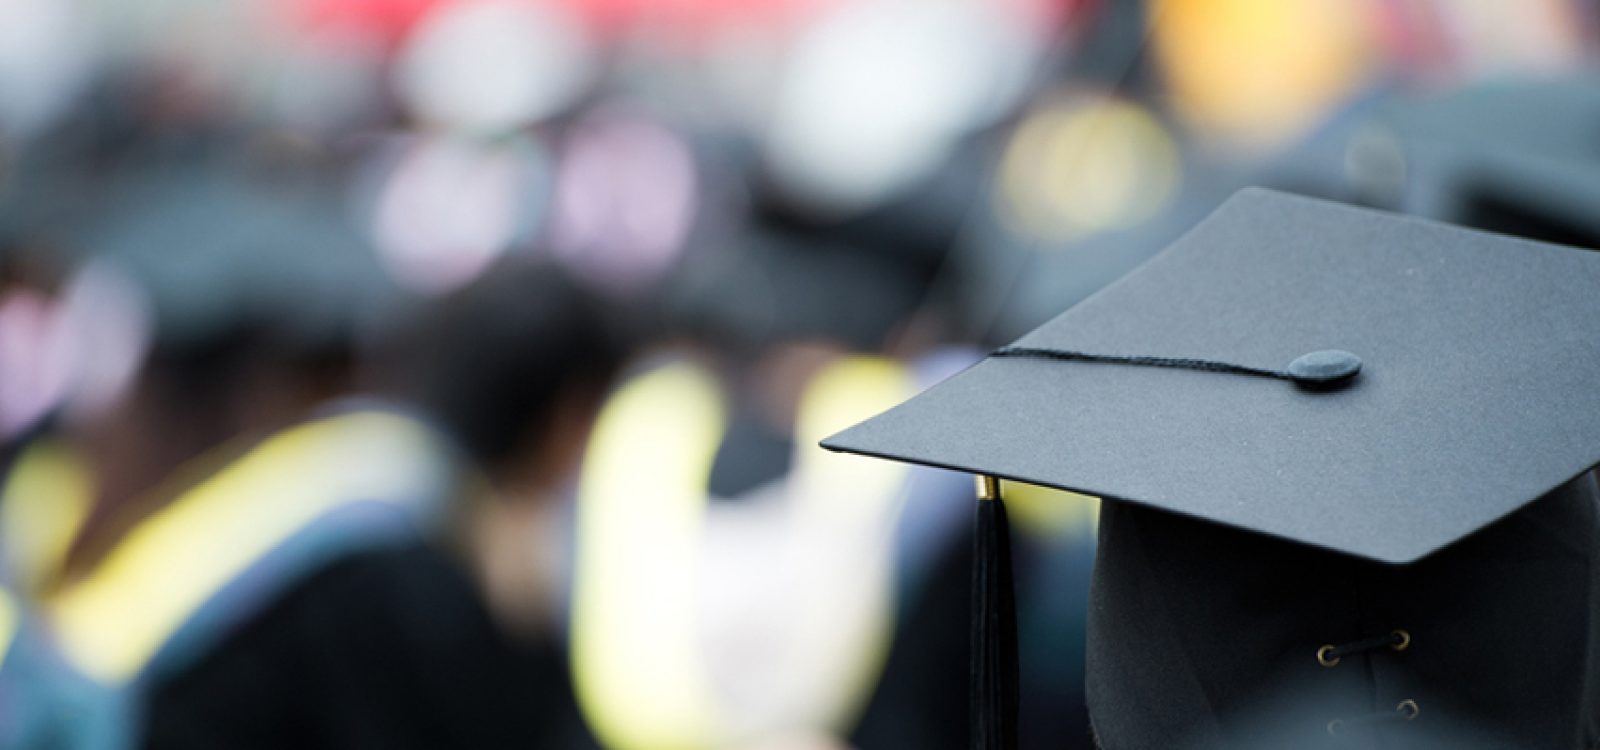 Actuarial graduates are being headhunted in the midst of a recession